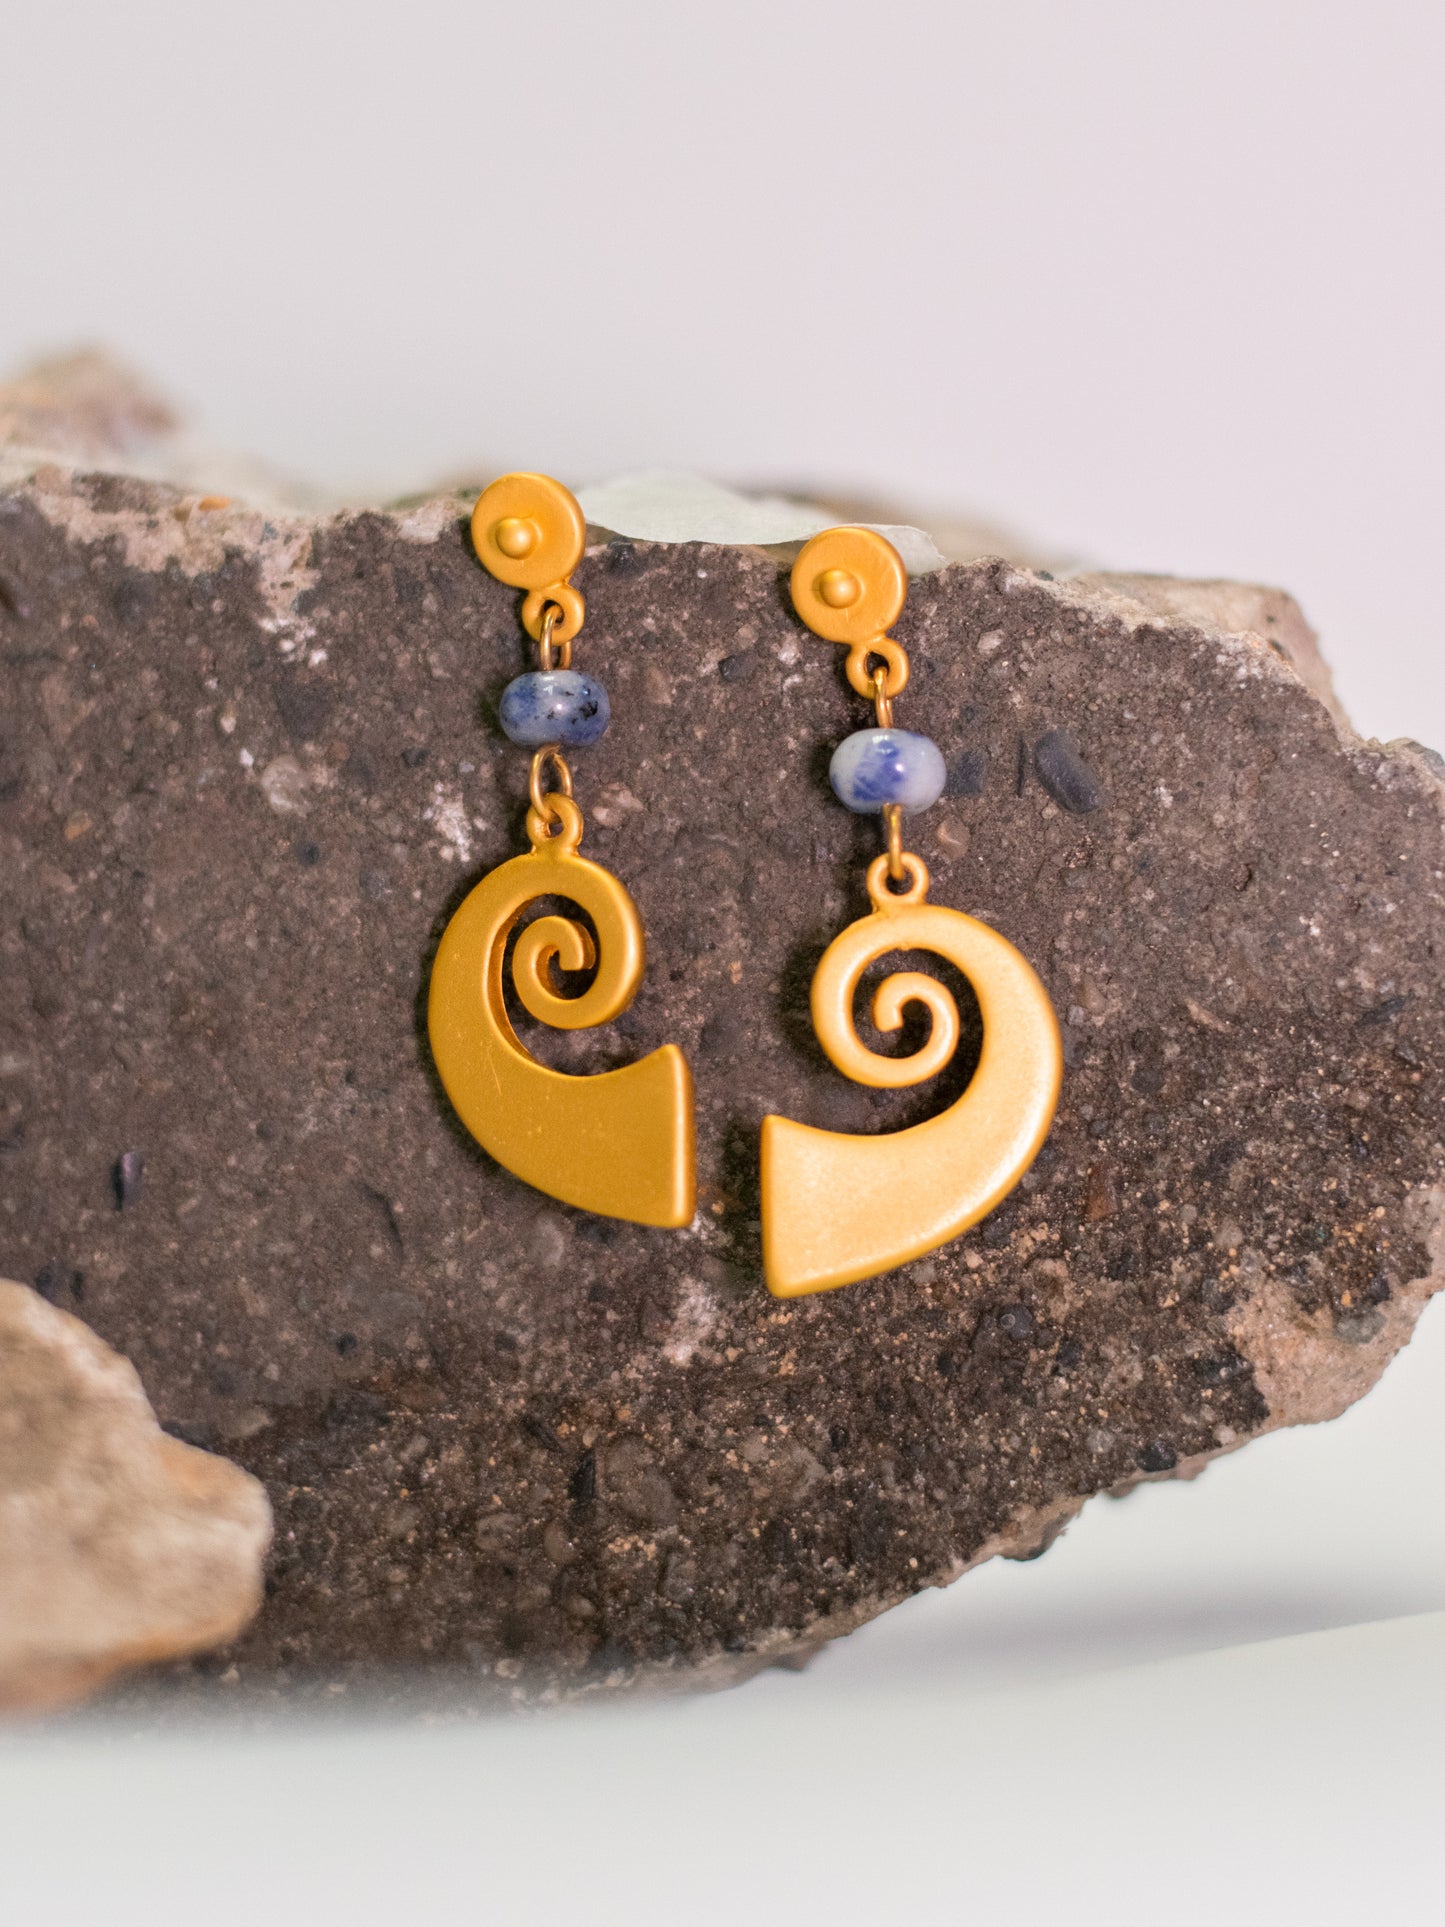 24K Gold Plated Pre-Columbian Muisca Spiral Earrings.